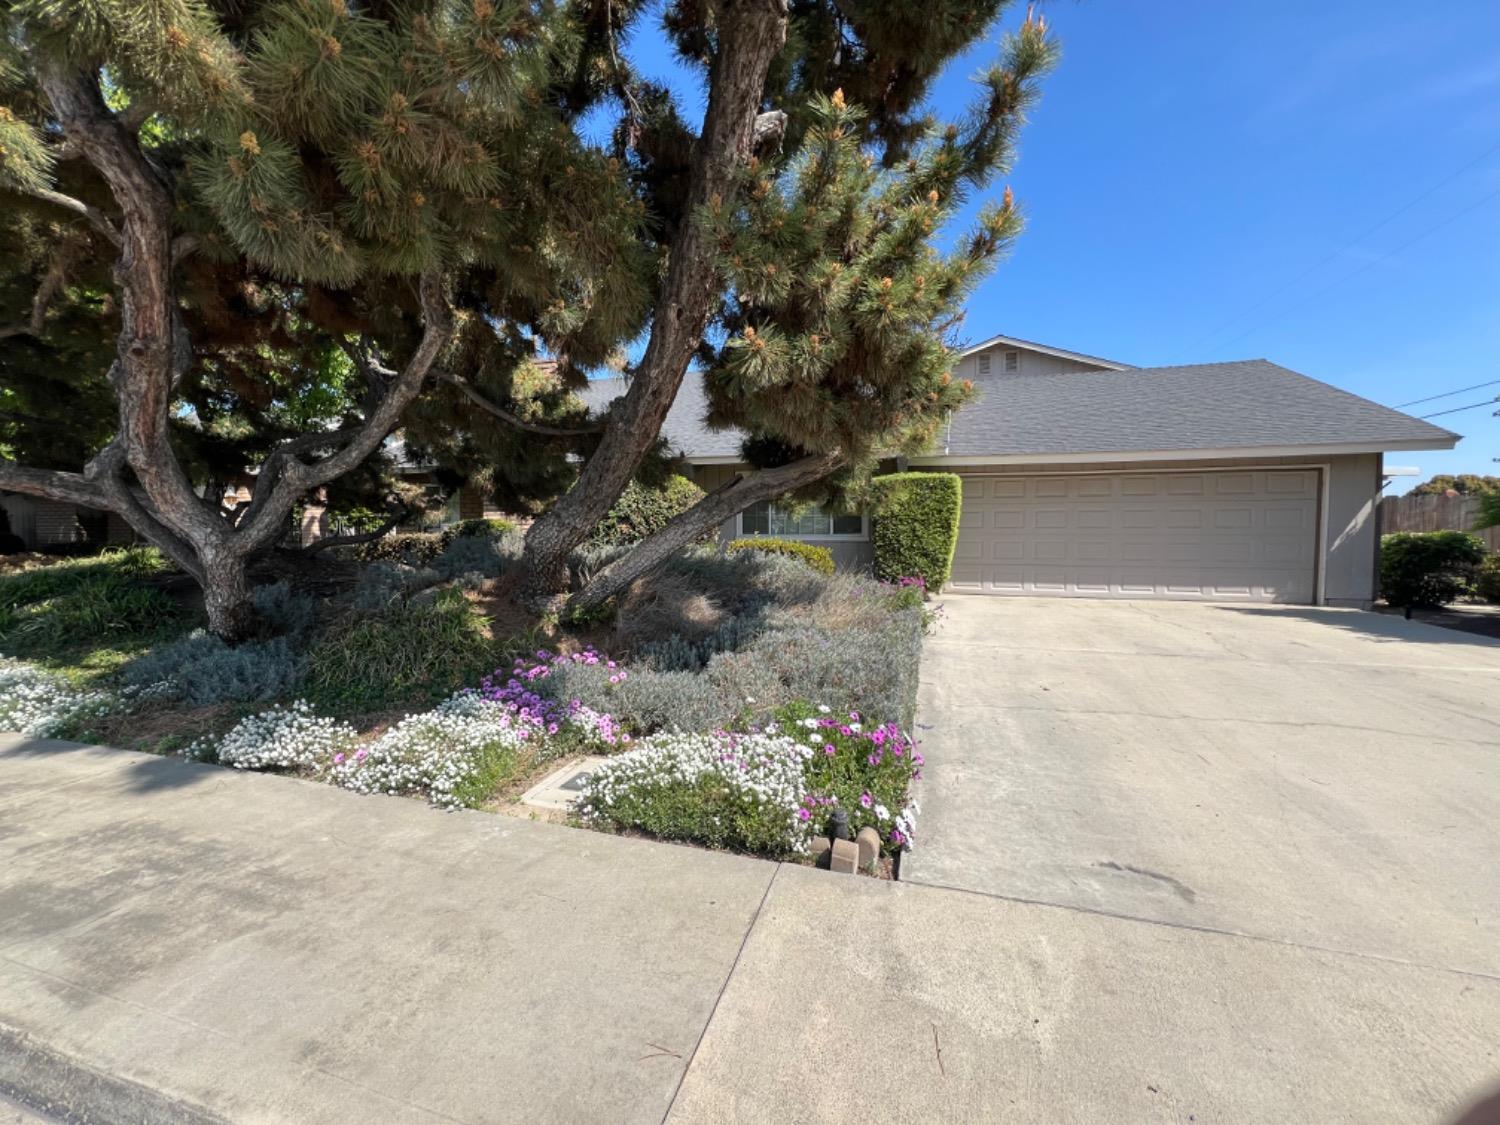 Photo of 2500 14th Ave in Kingsburg, CA